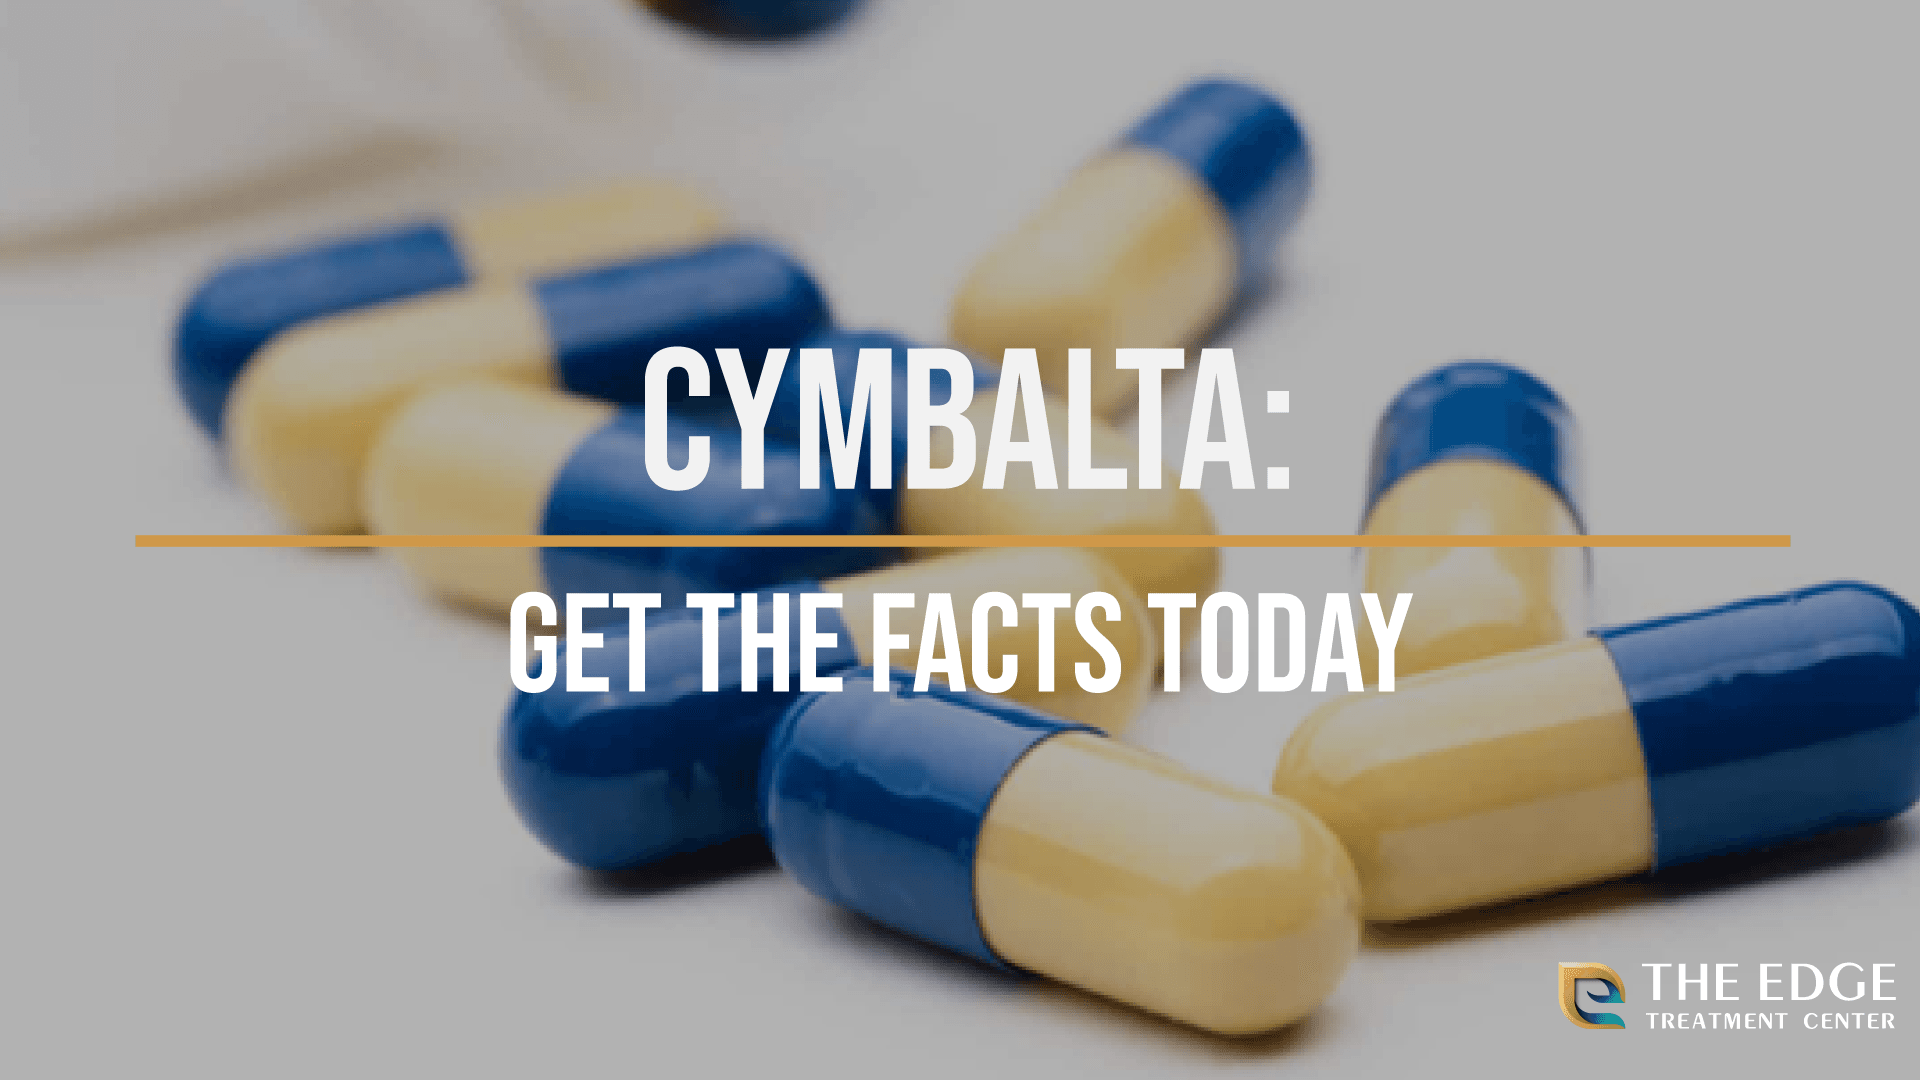 What is Cymbalta?